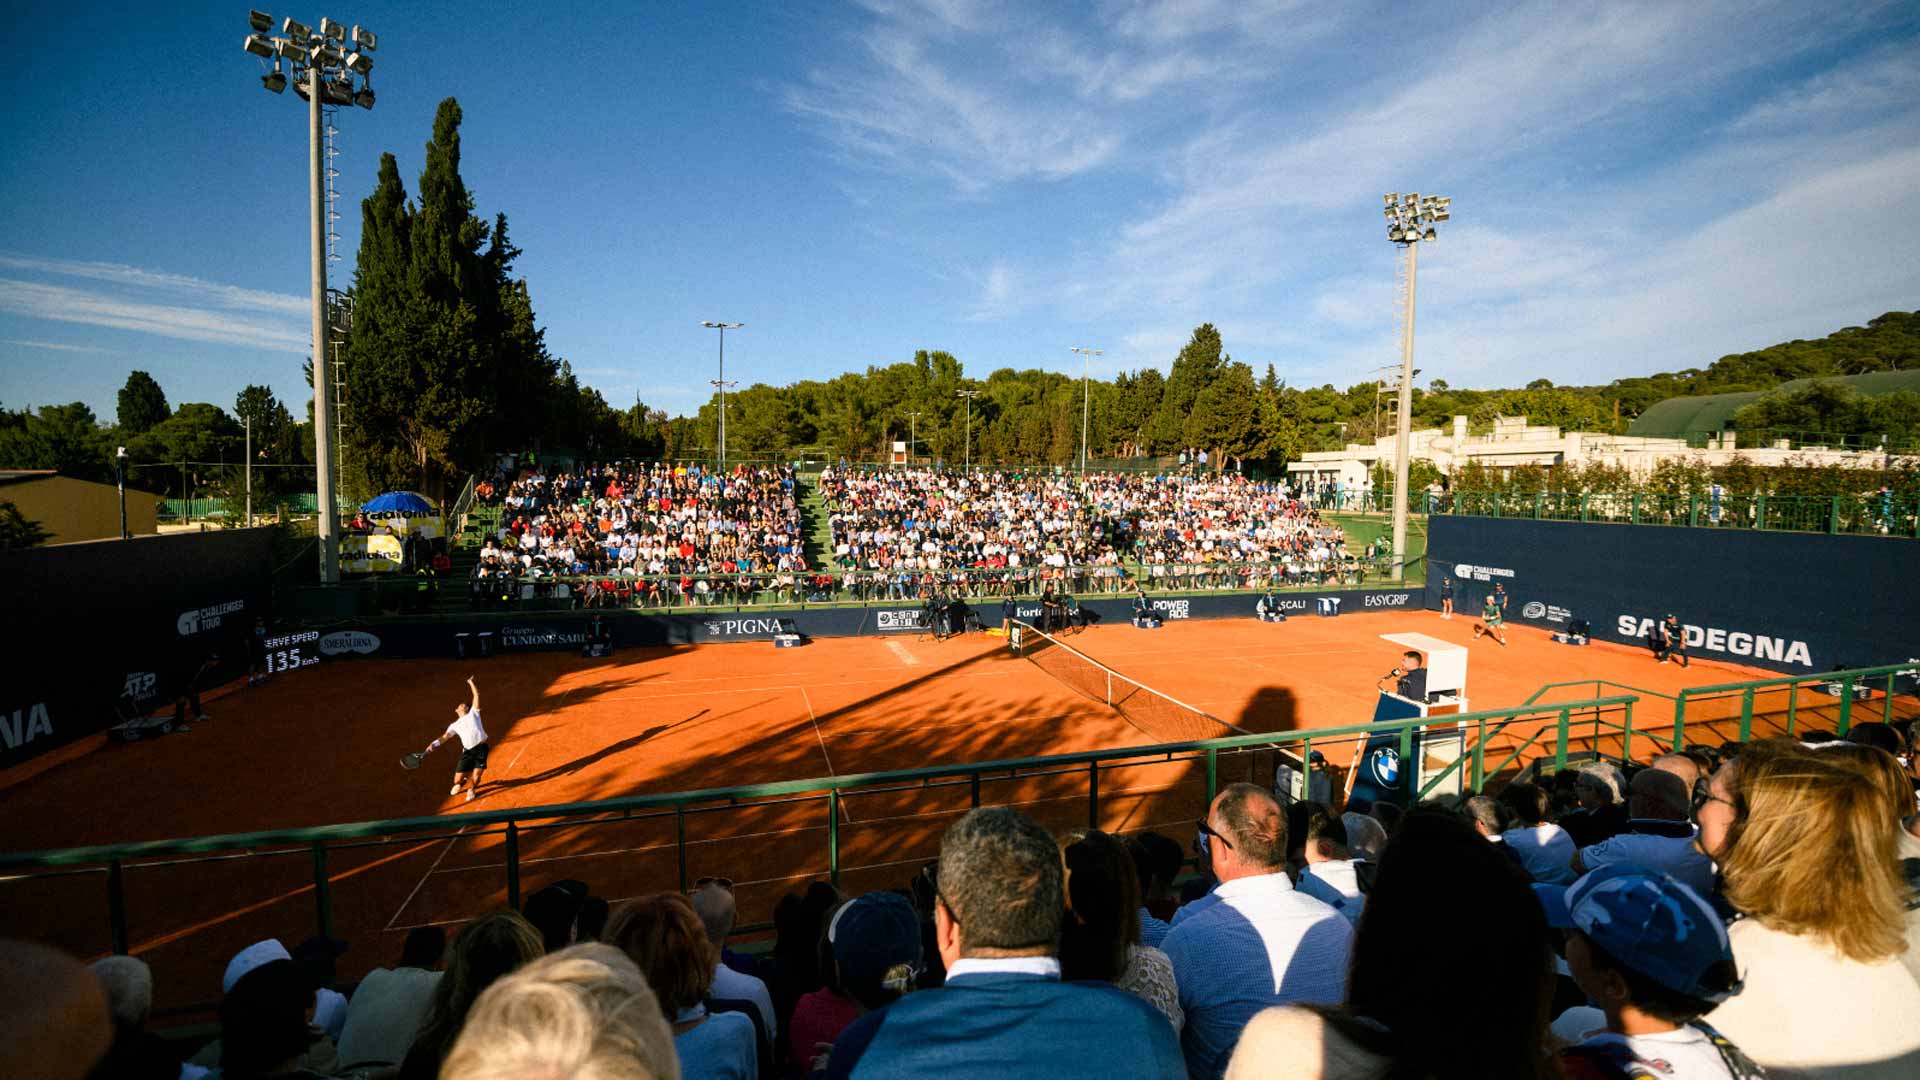 Fans fill the stadium for Sunday's final at the Cagliari Challenger.